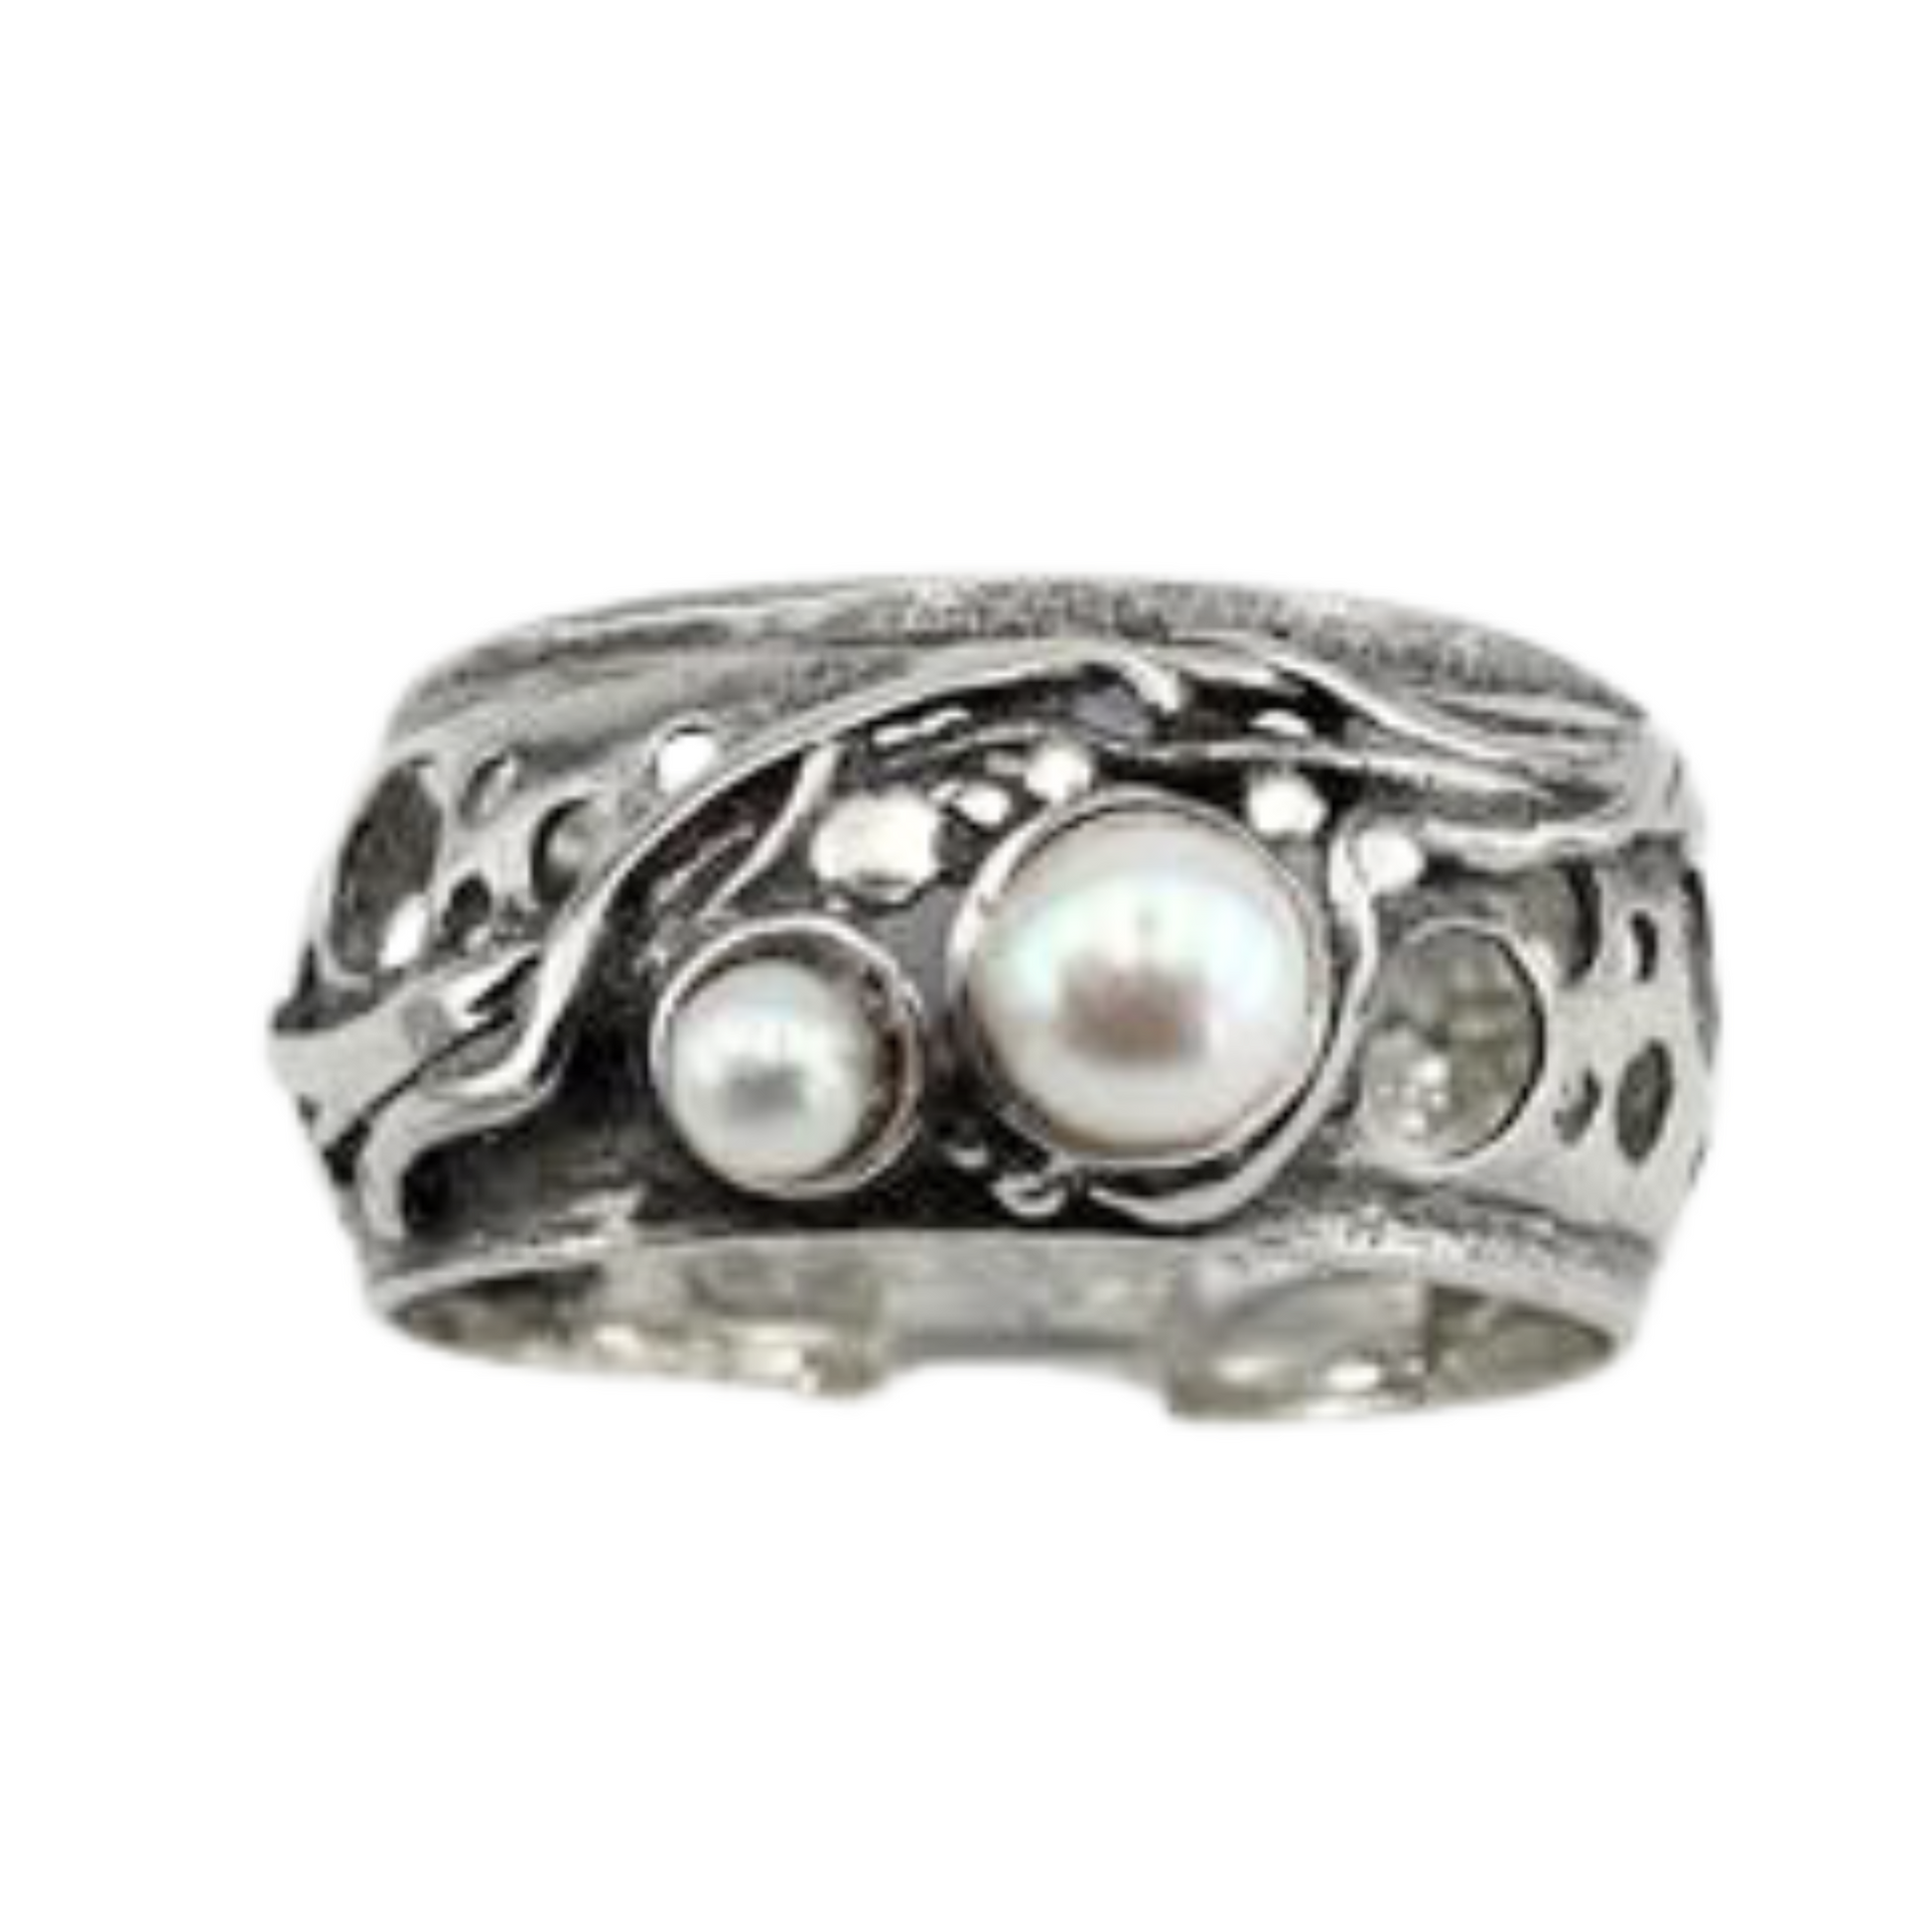 Solid silver ring with genuine natural pearls – Hadar Jewelry